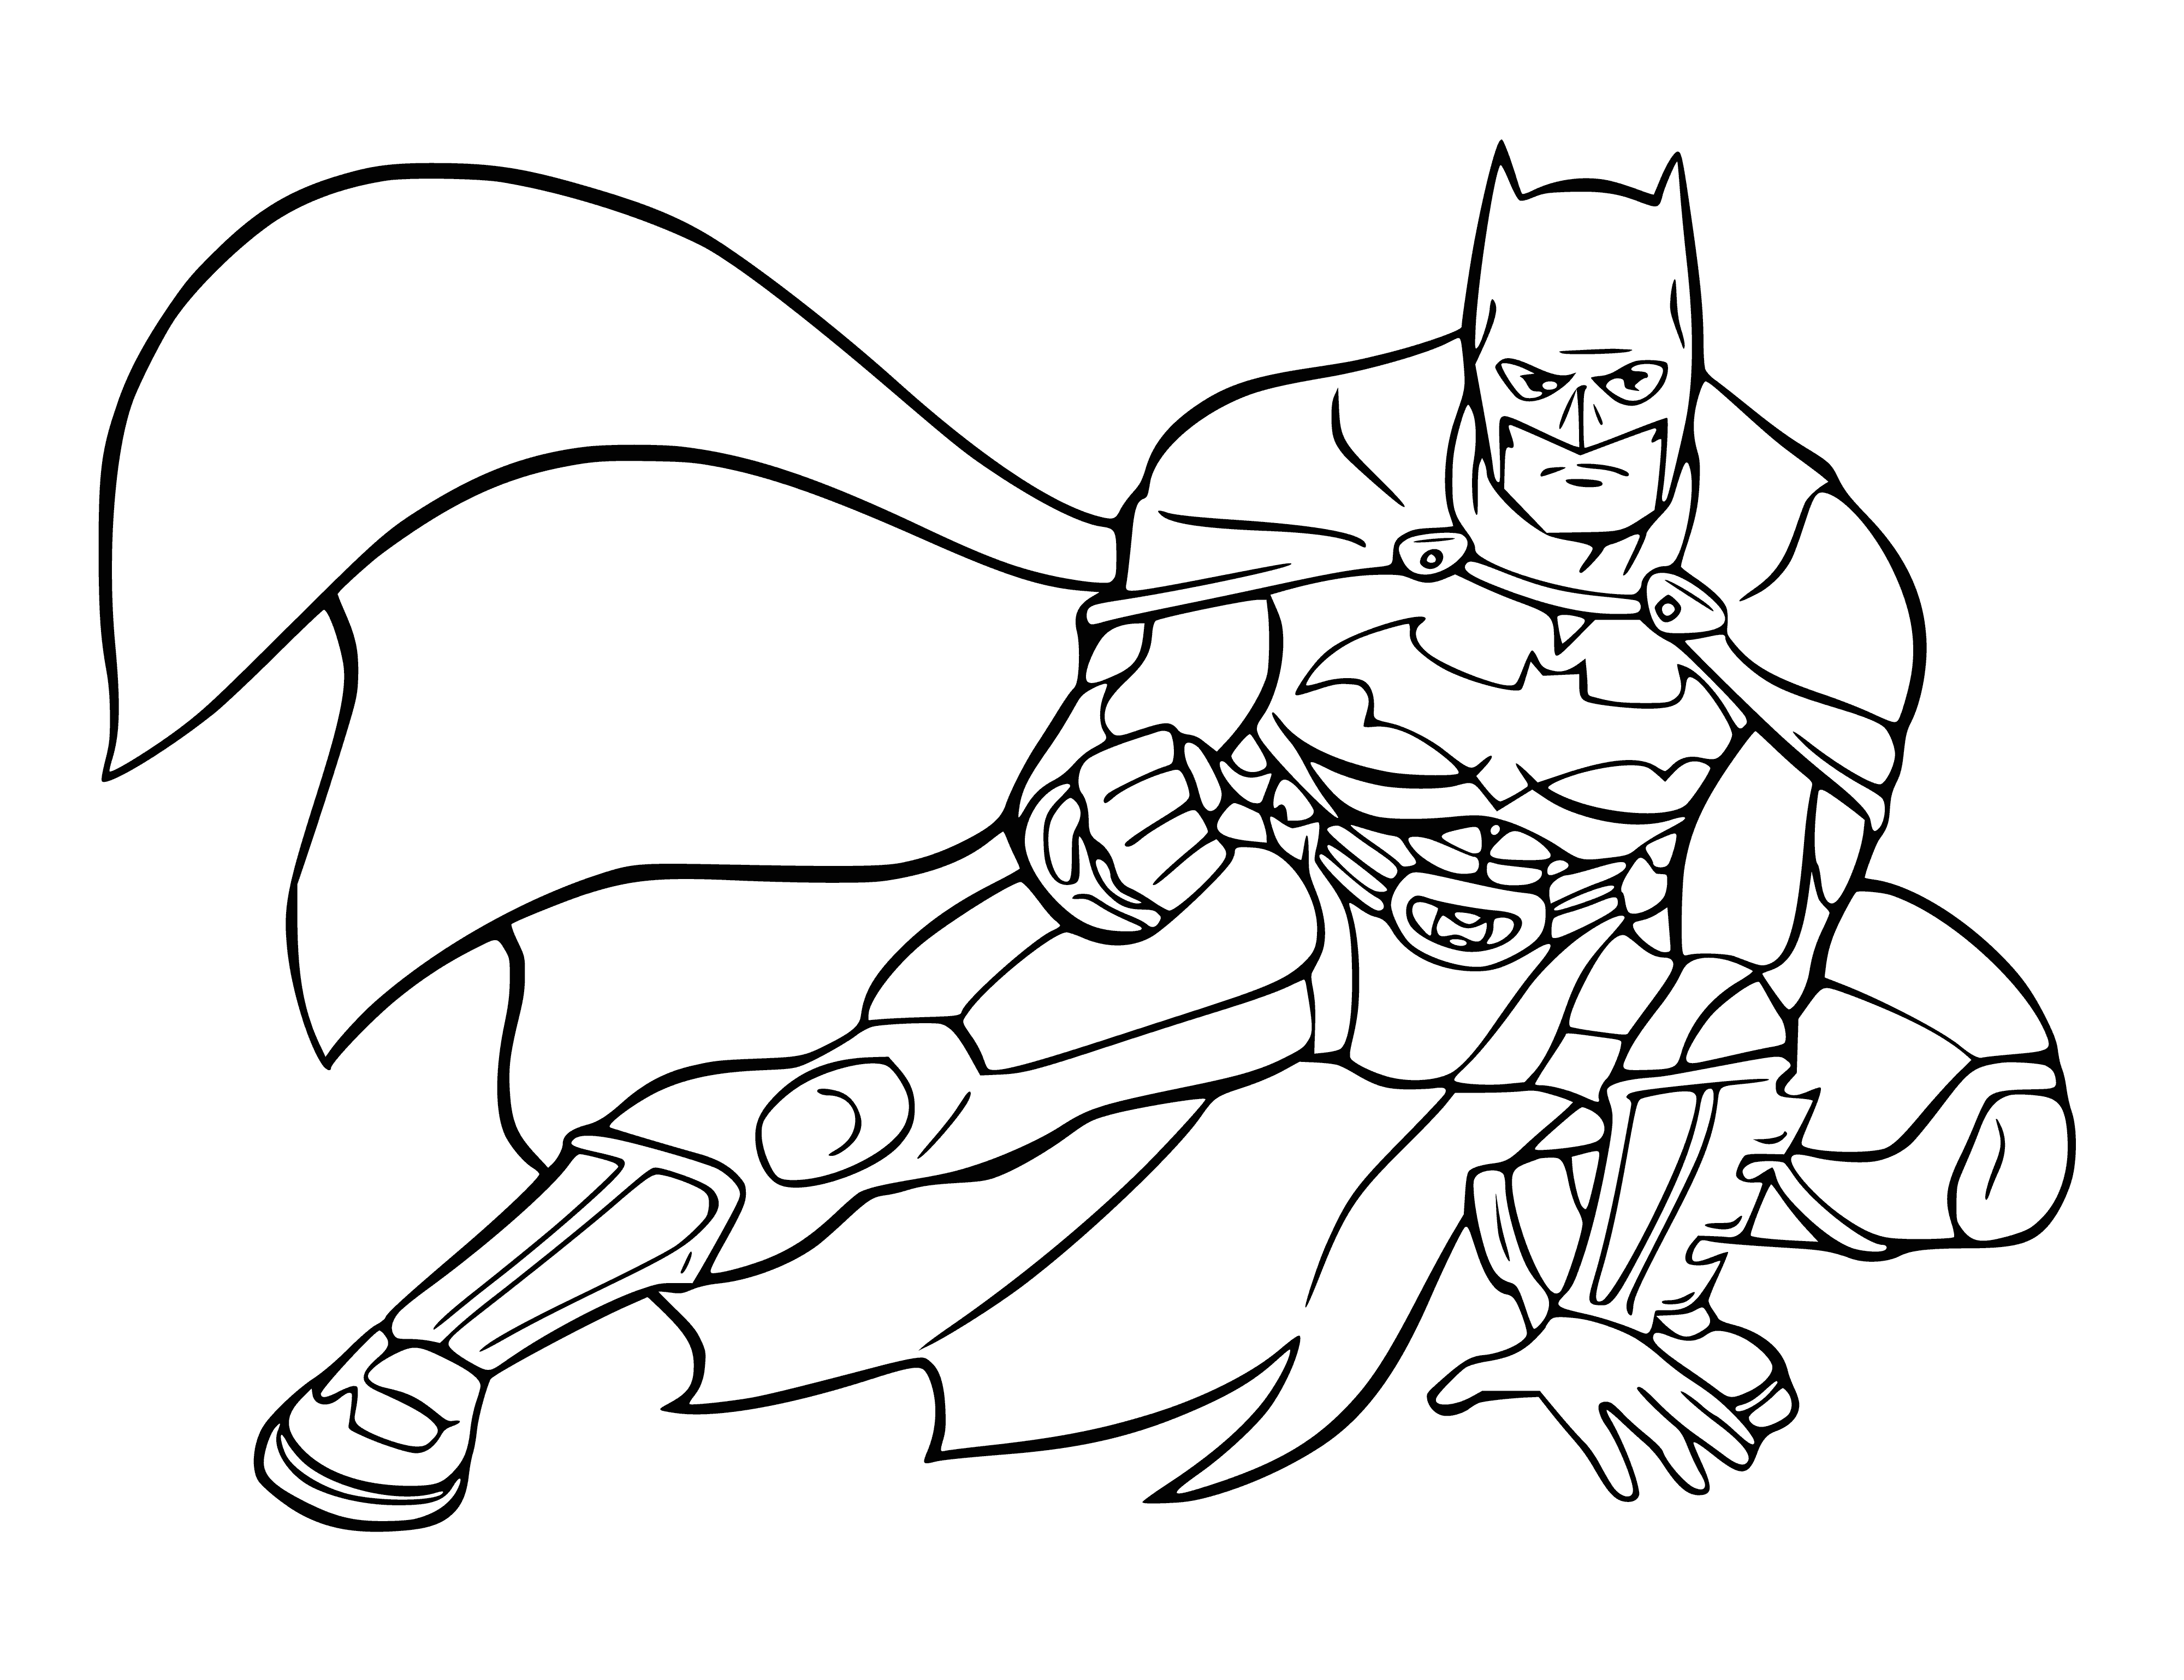 coloring page: Batman stands on top of a building, cape blowing in the wind, looking tough & confident. City skyline visible behind him.